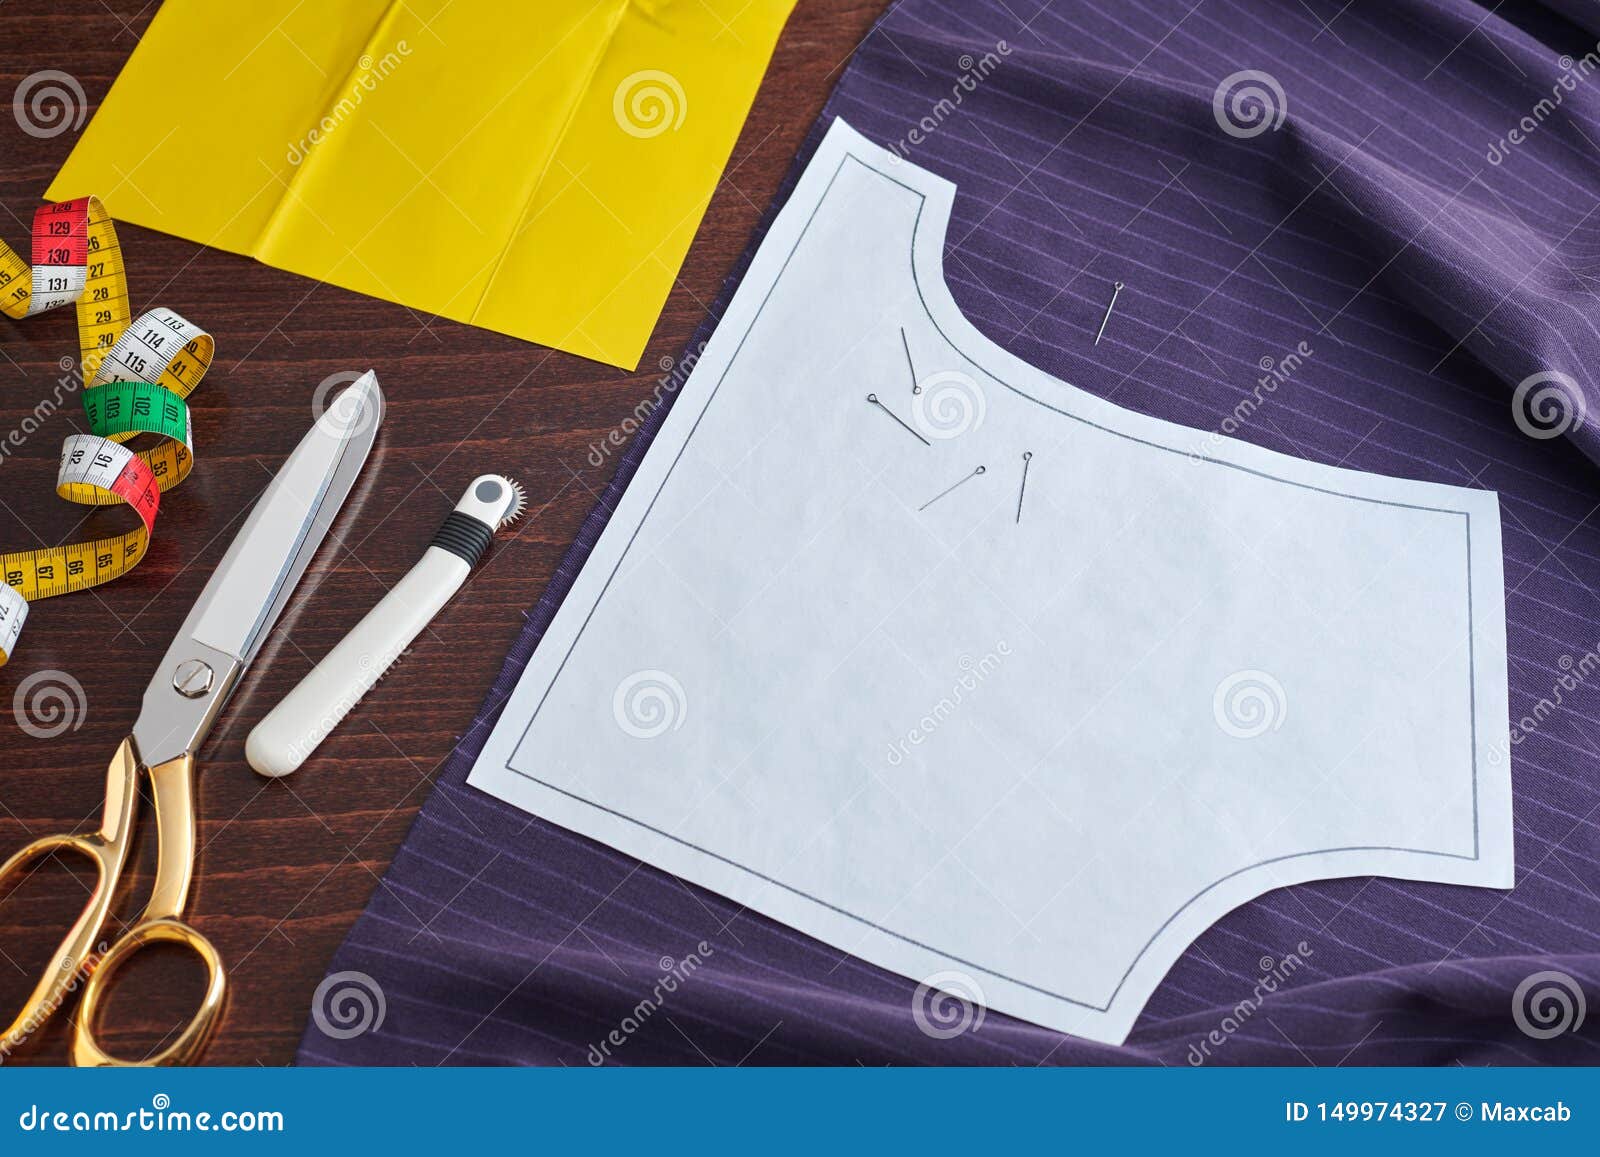 Sewing Pattern on Fabric, Tracing Wheel, Tracing Paper, Sewing Equipment  Stock Image - Image of sewing, tailoring: 149974327